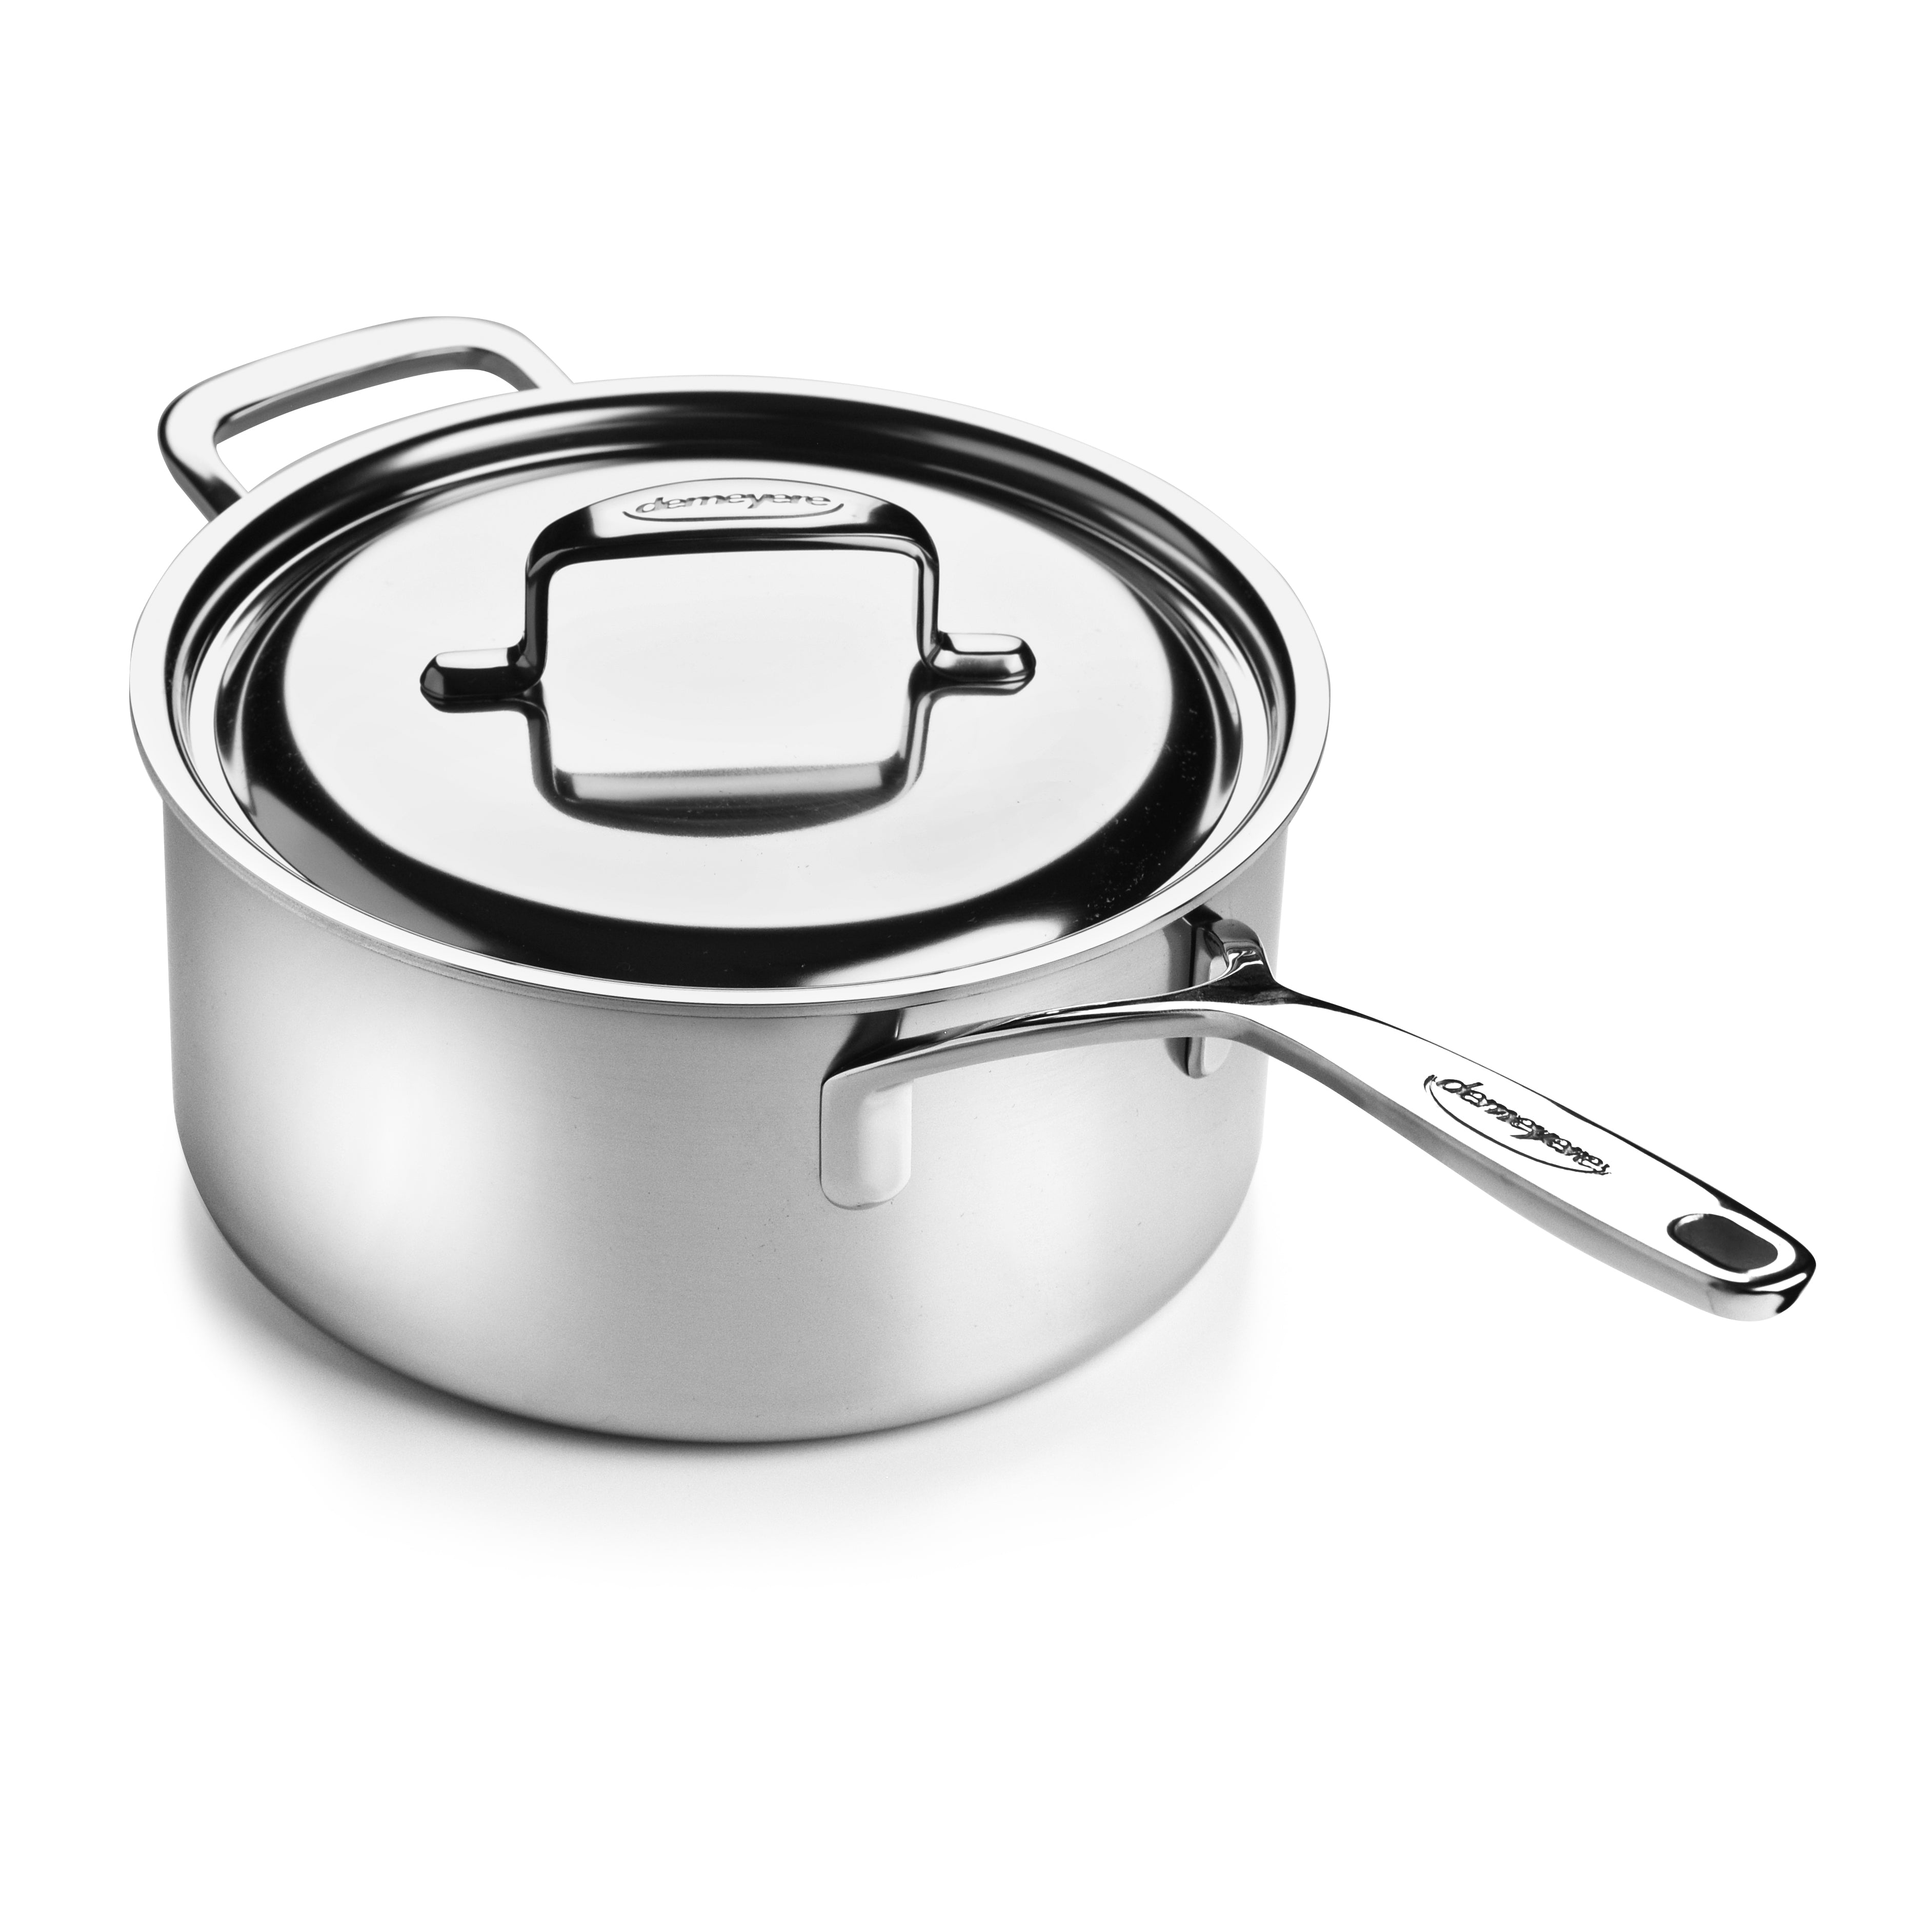 Win One of Four Demeyere 5-Plus Cookware Sets